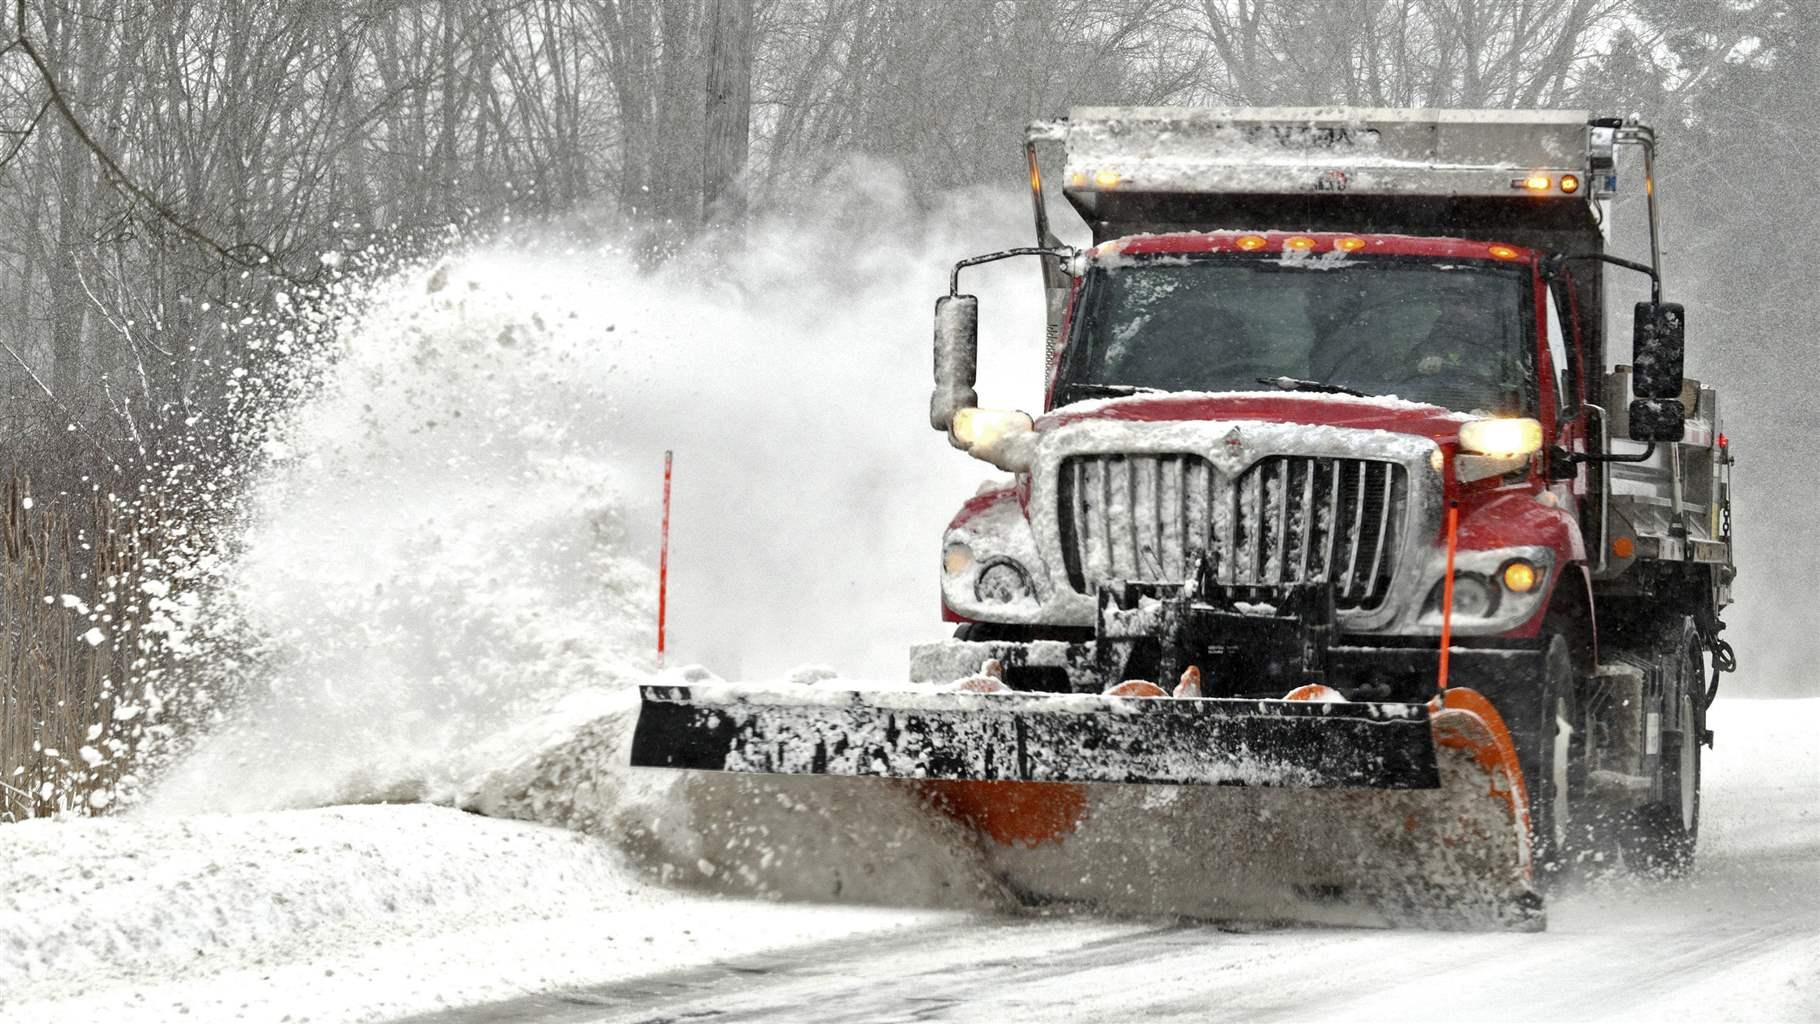 A snow plows work along Route 307 on Thursday afternoon, Feb. 3, 2022, as snow falls in Jefferson, Ohio.